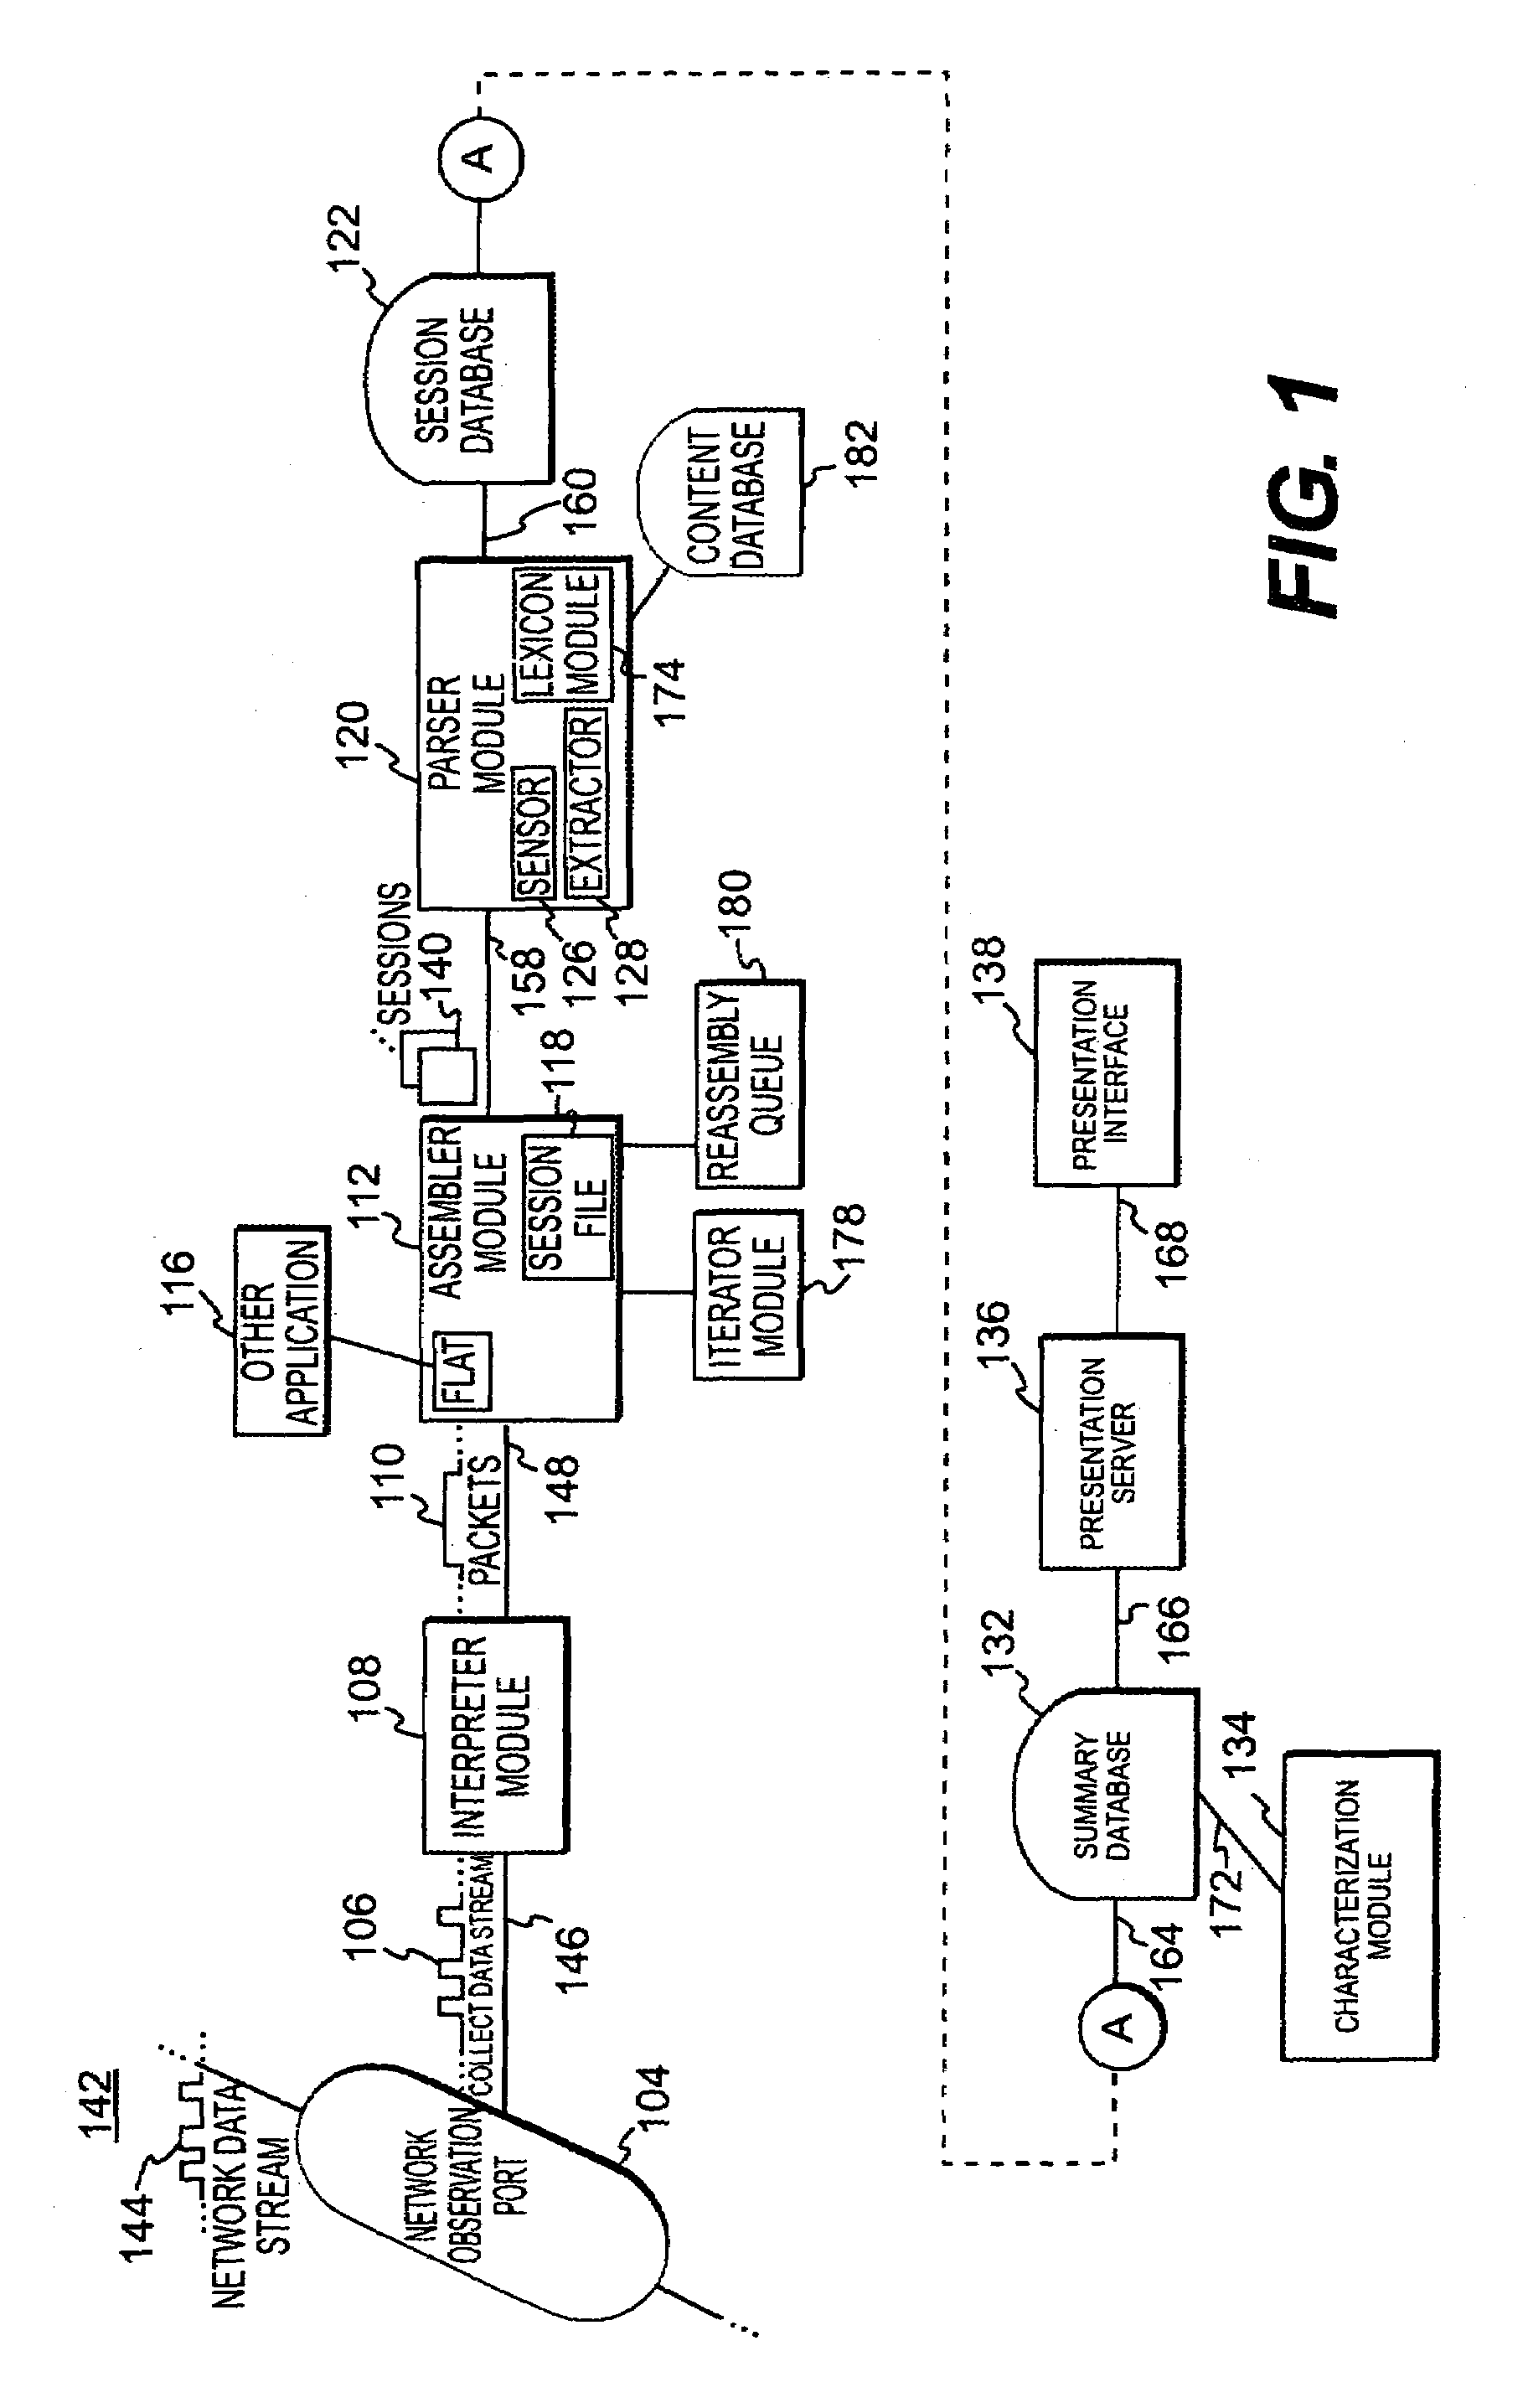 System and method for network security